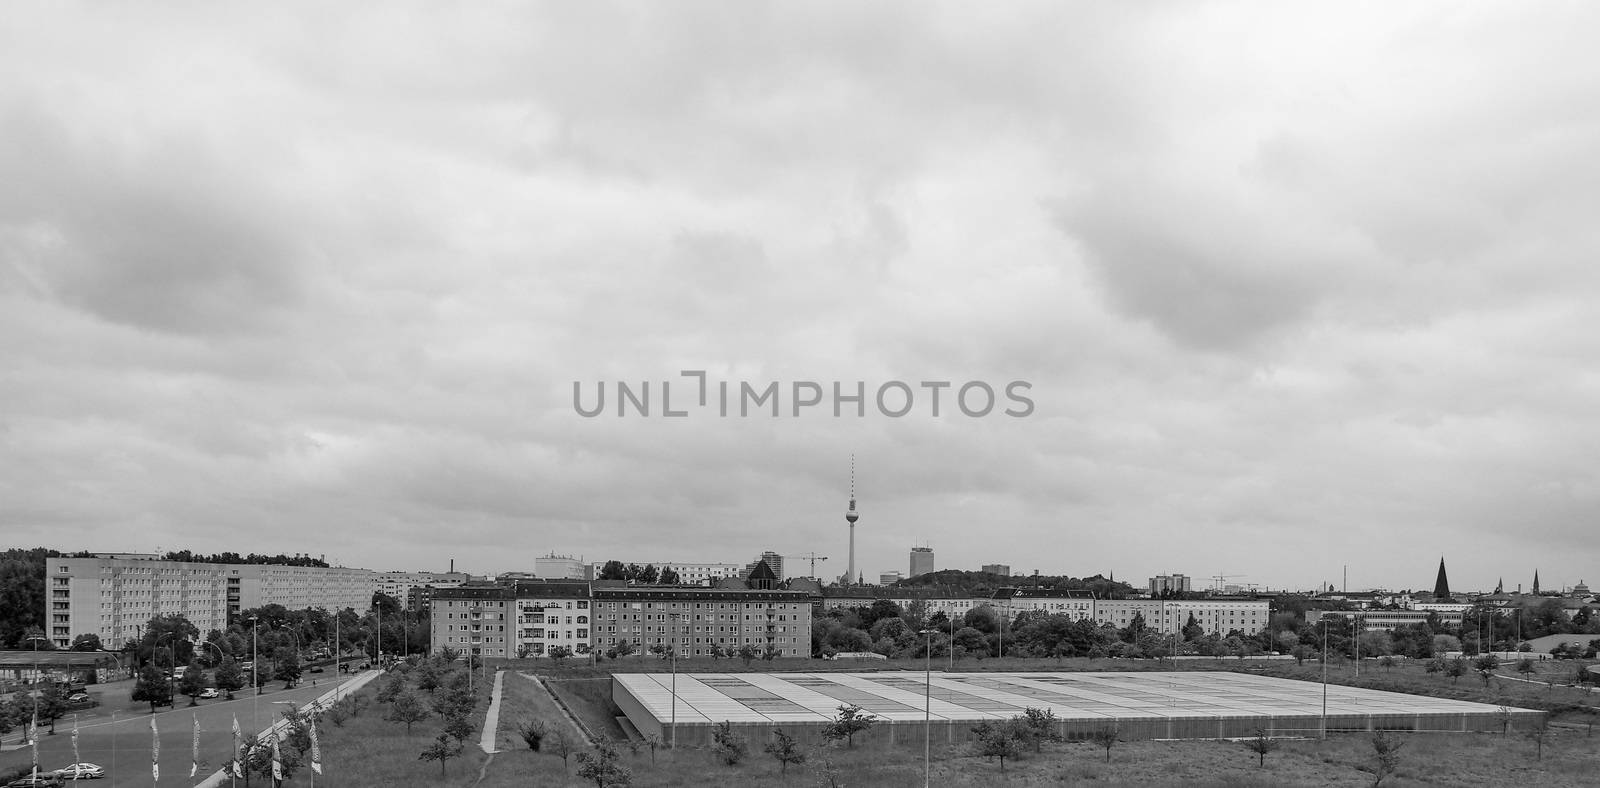  View of the city of Berlin in Germany in black and white